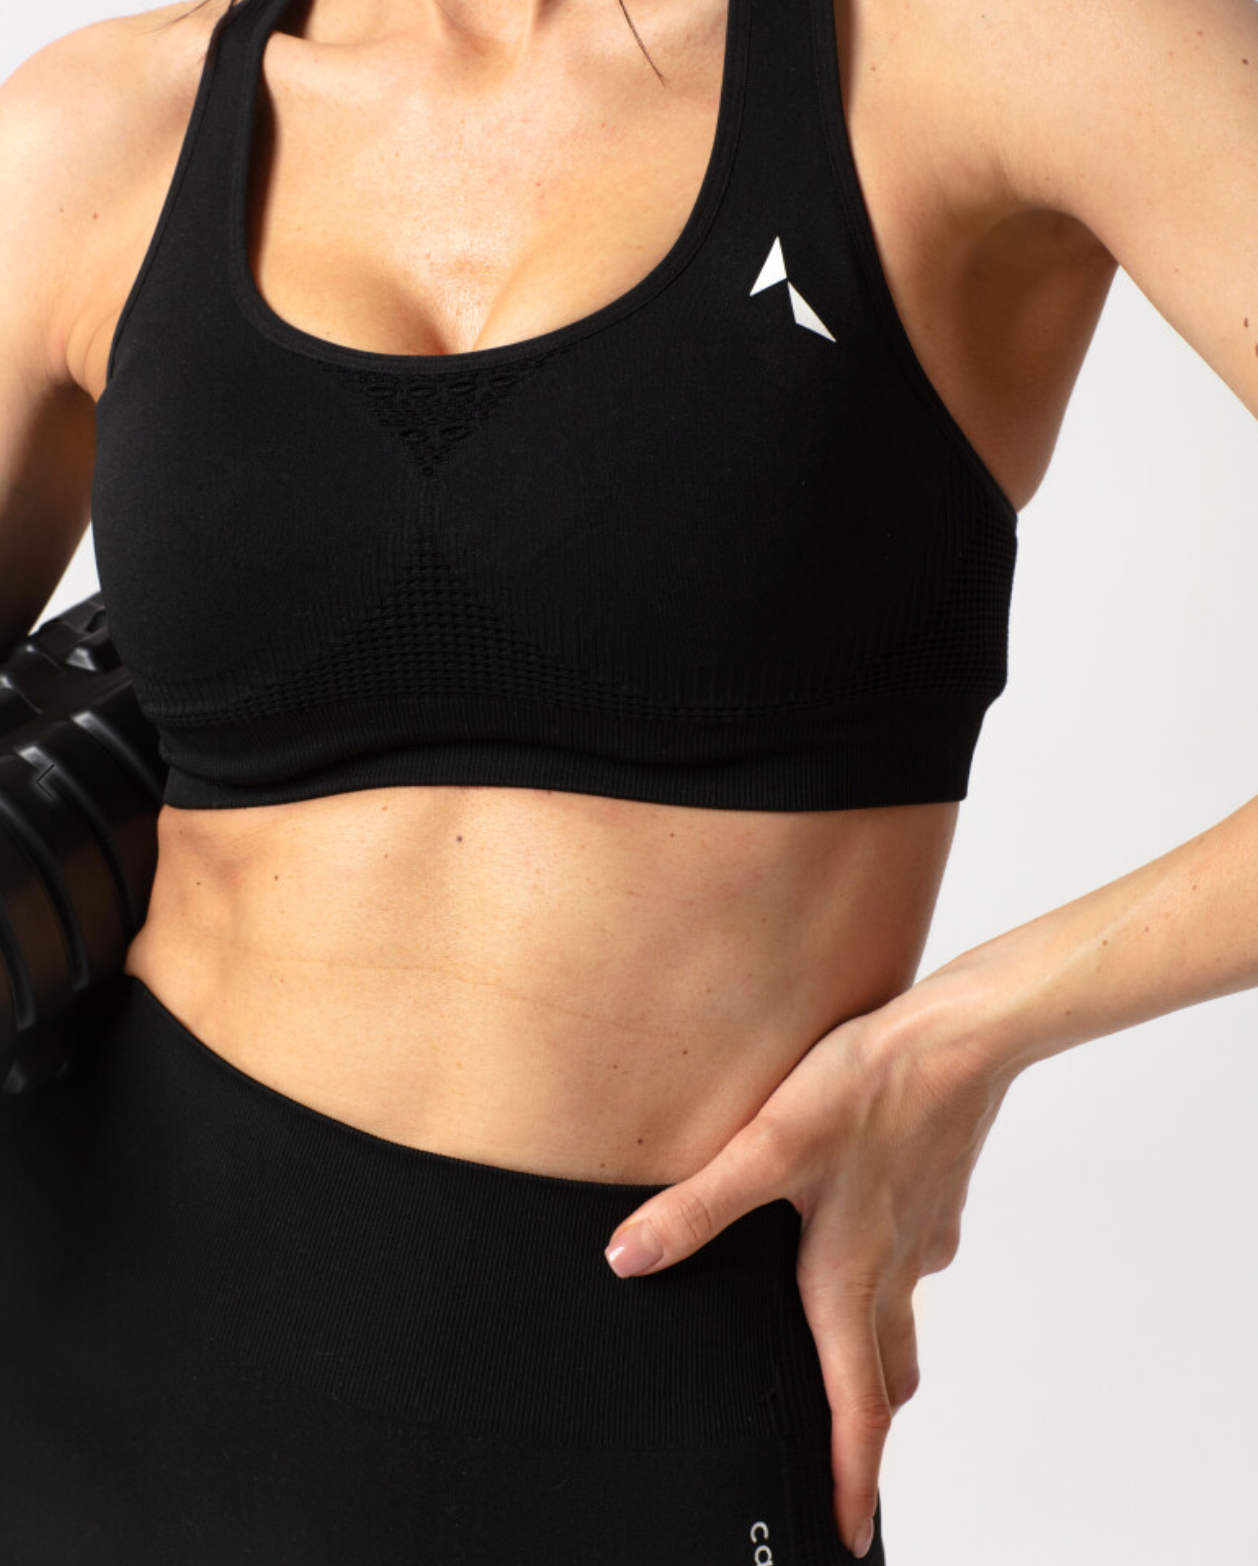 Carpatree Phase Seamless Bra - Black seamless sports bra with removable padding and racer back with crochet style detail.